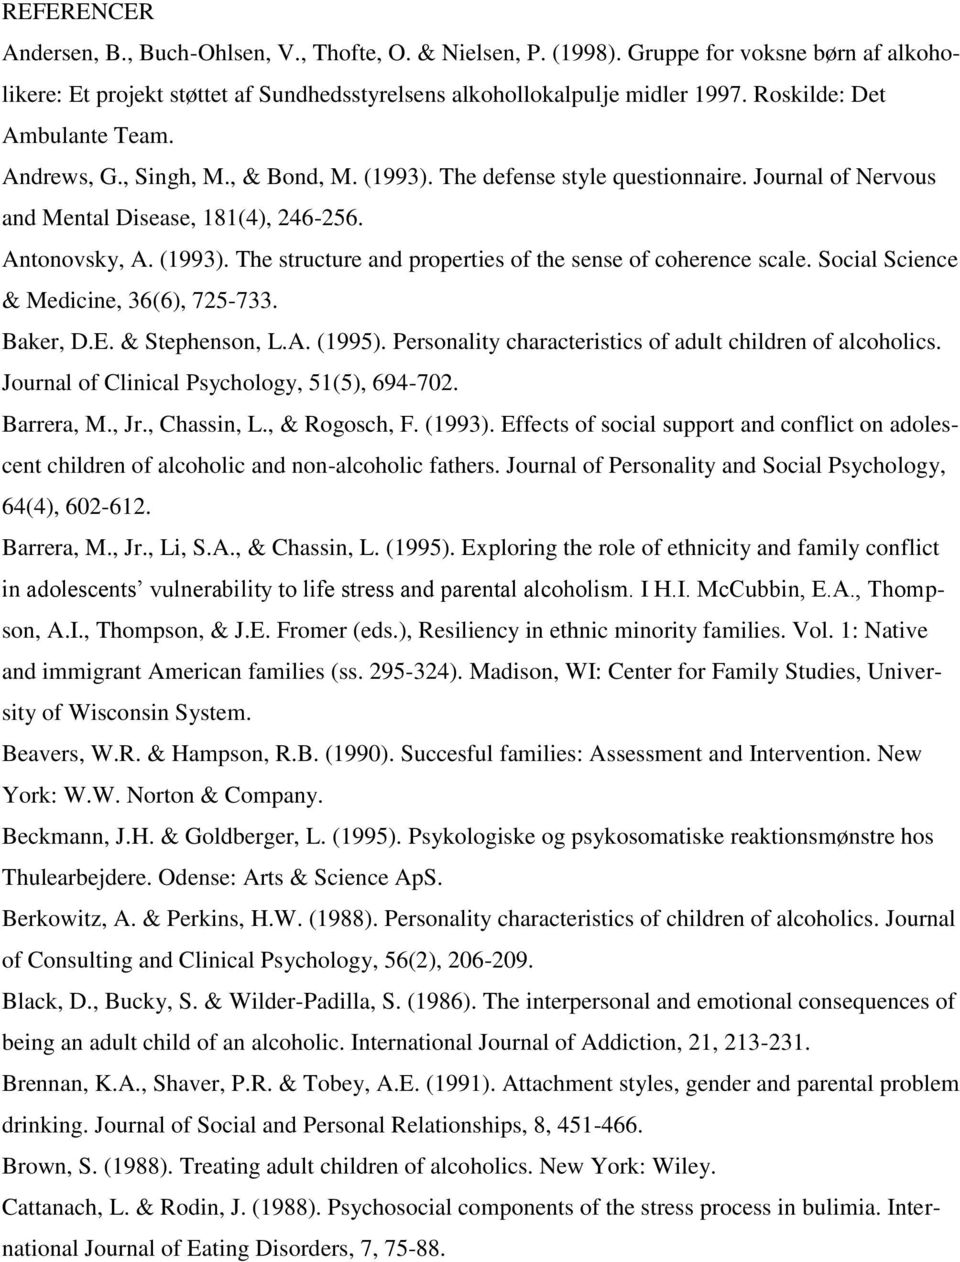 Social Science & Medicine, 36(6), 725-733. Baker, D.E. & Stephenson, L.A. (1995). Personality characteristics of adult children of alcoholics. Journal of Clinical Psychology, 51(5), 694-702.